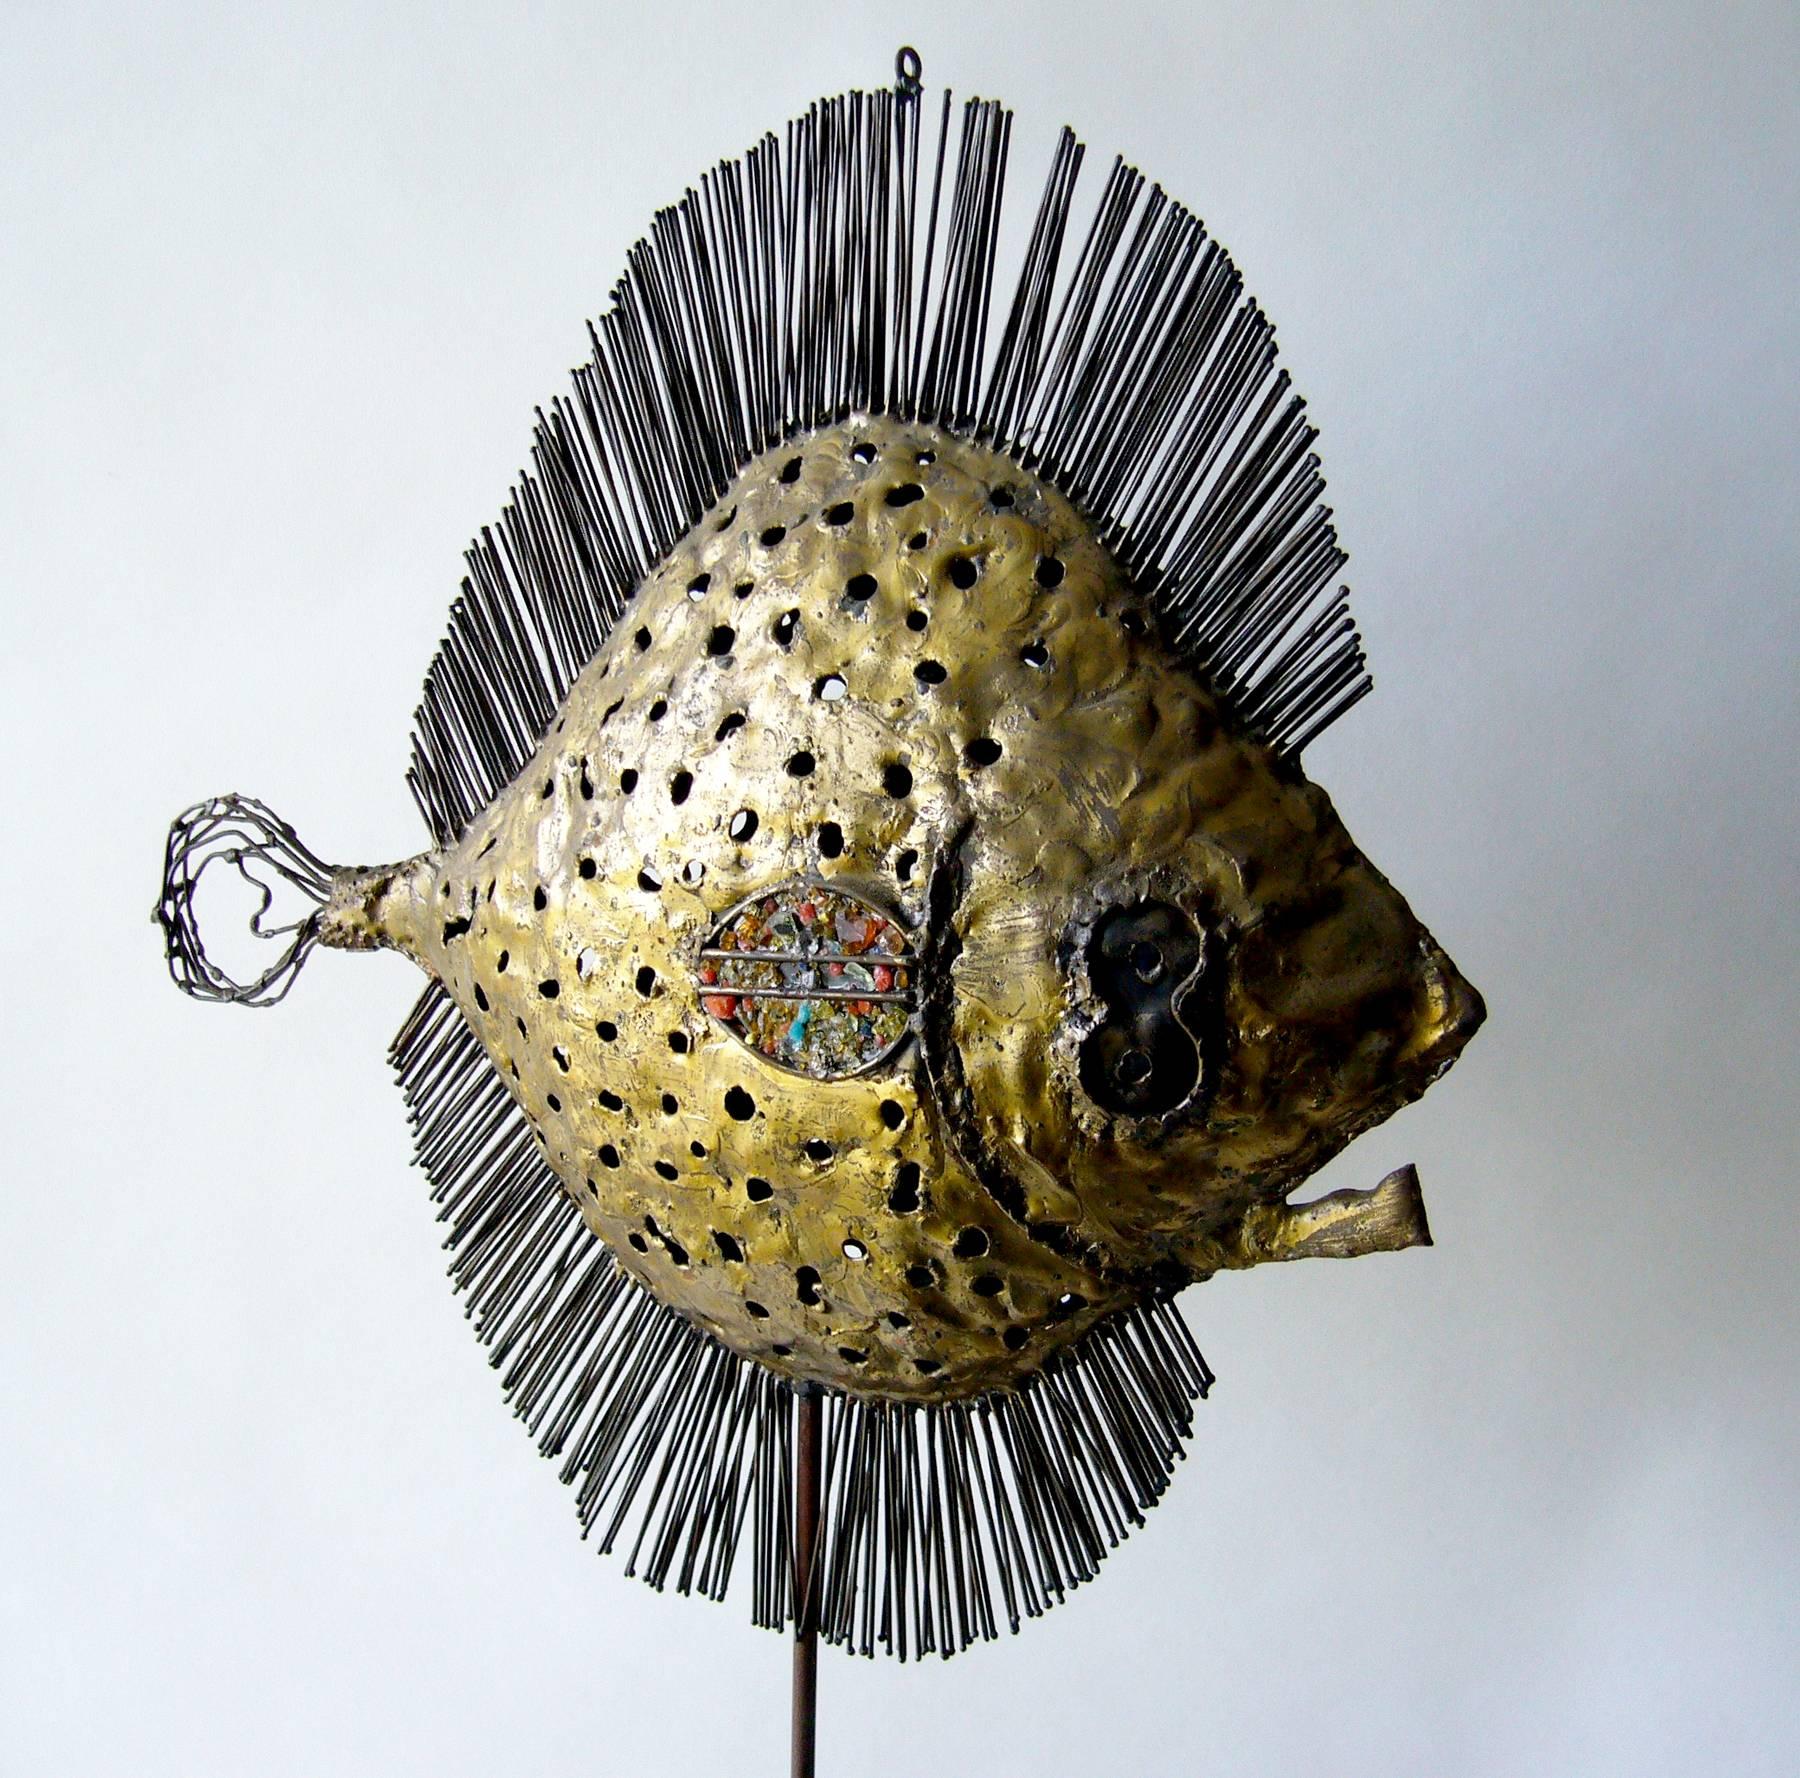 Large-scale handmade brass and glass mosaic modernist fish sculpture created by Emaus. Emaus is the name of the workshop of the Benedictine Monks of Cuernavaca in the State of Morelos in Mexico. Sculpture measures 32